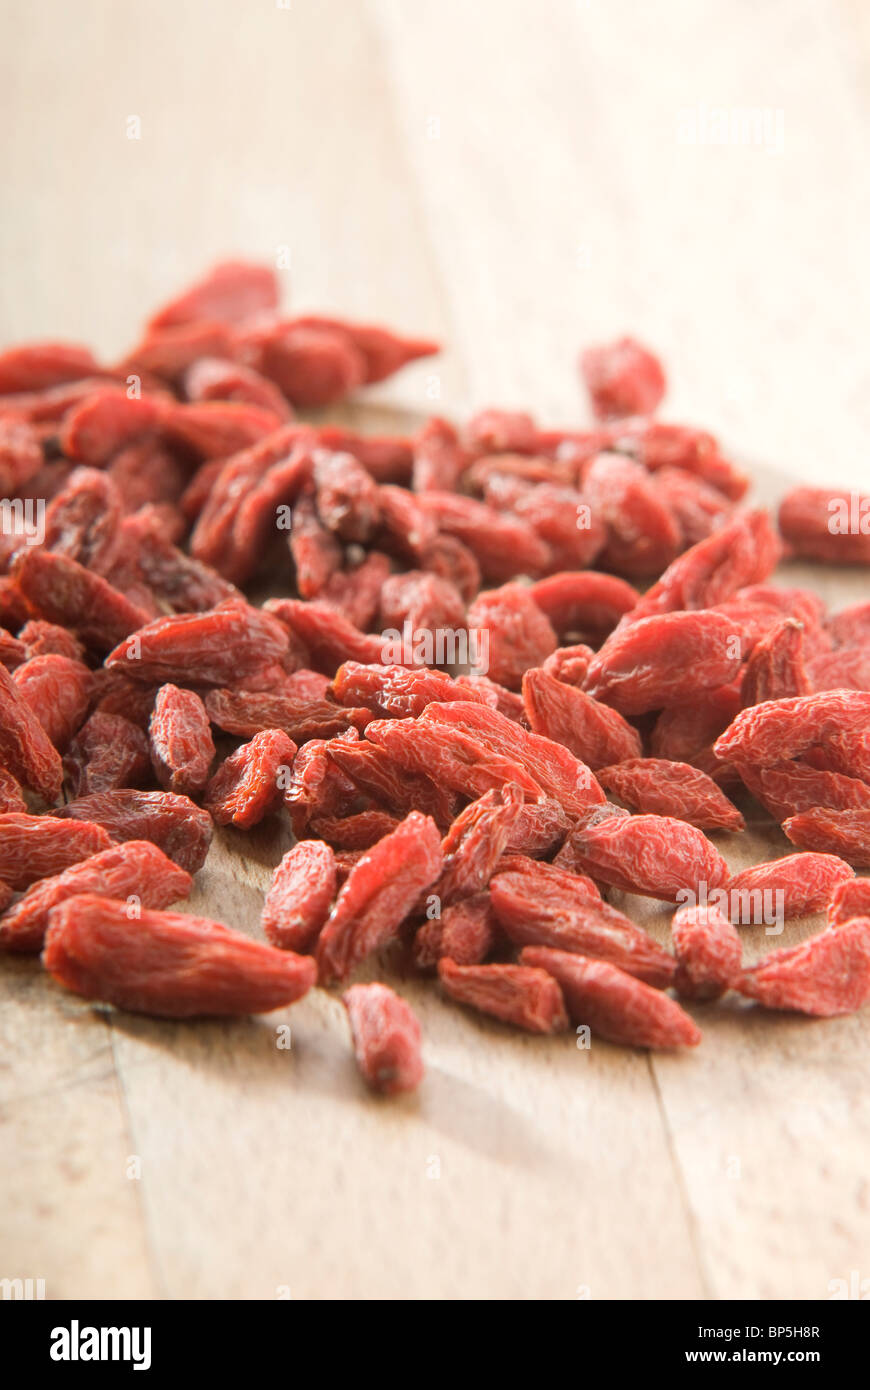 pile of red goji berries (Lycium chinense) on wooden board Stock Photo